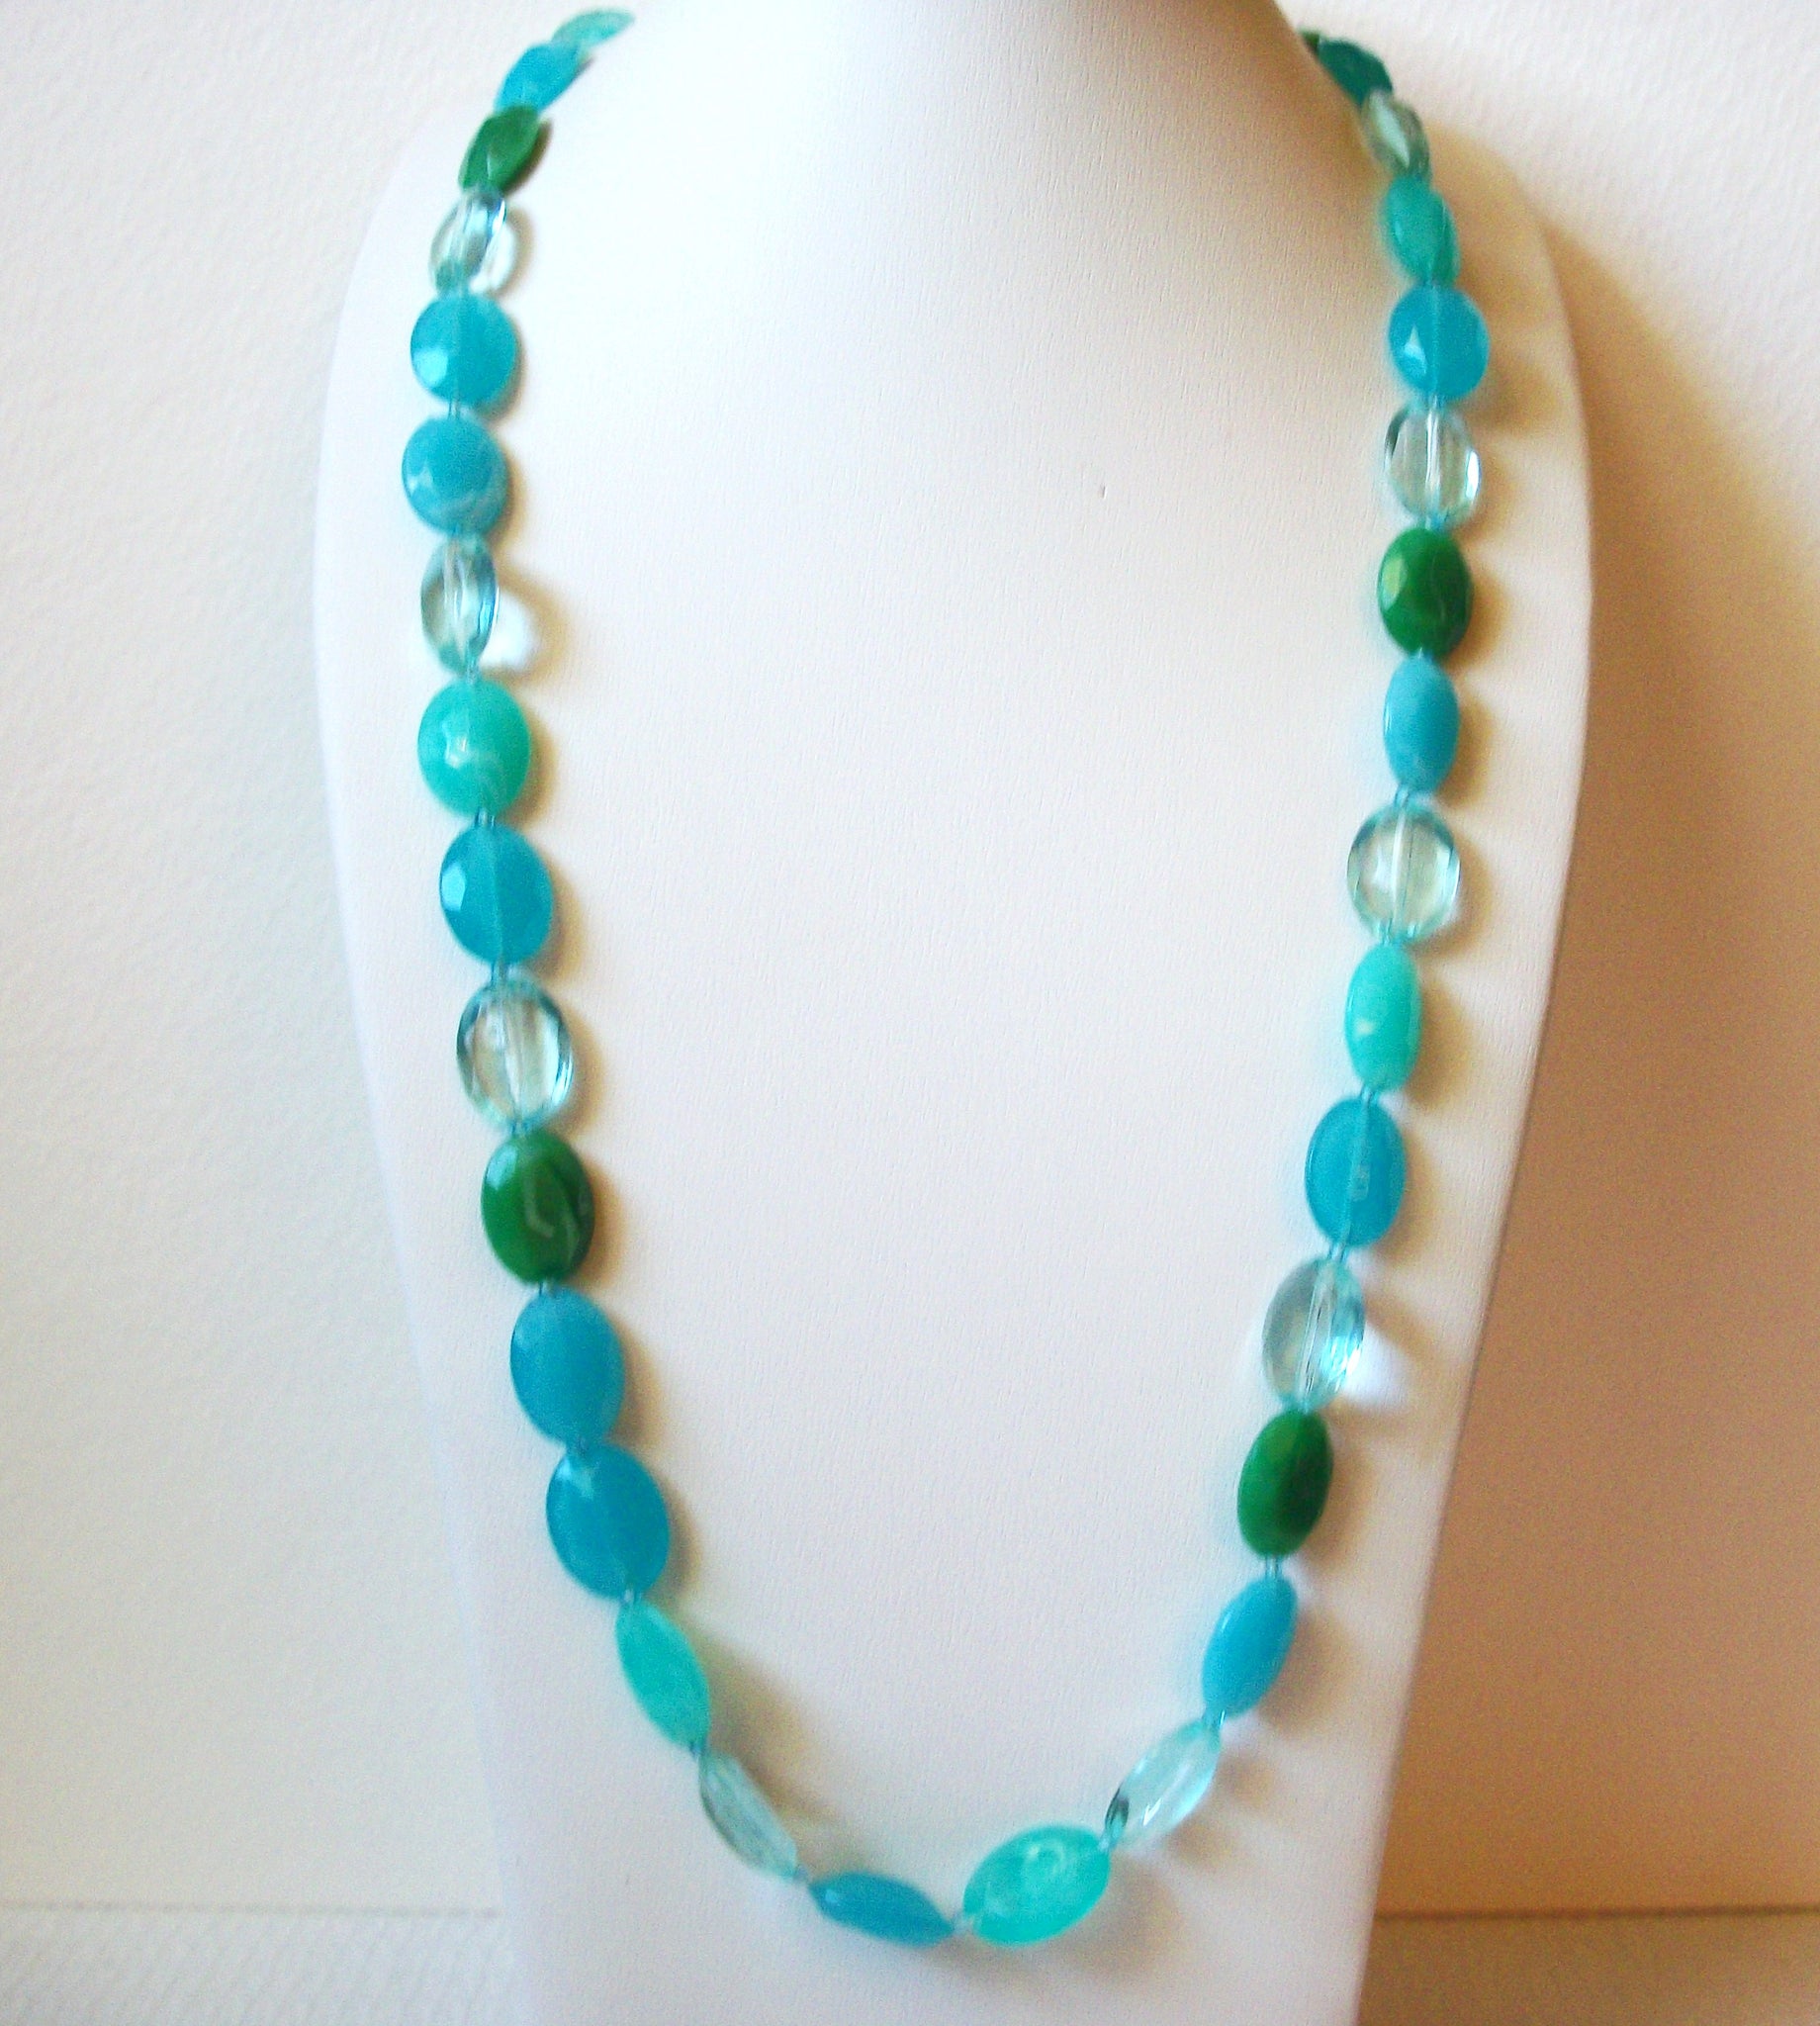 Retro Turquoise Blue Green Necklace 100420